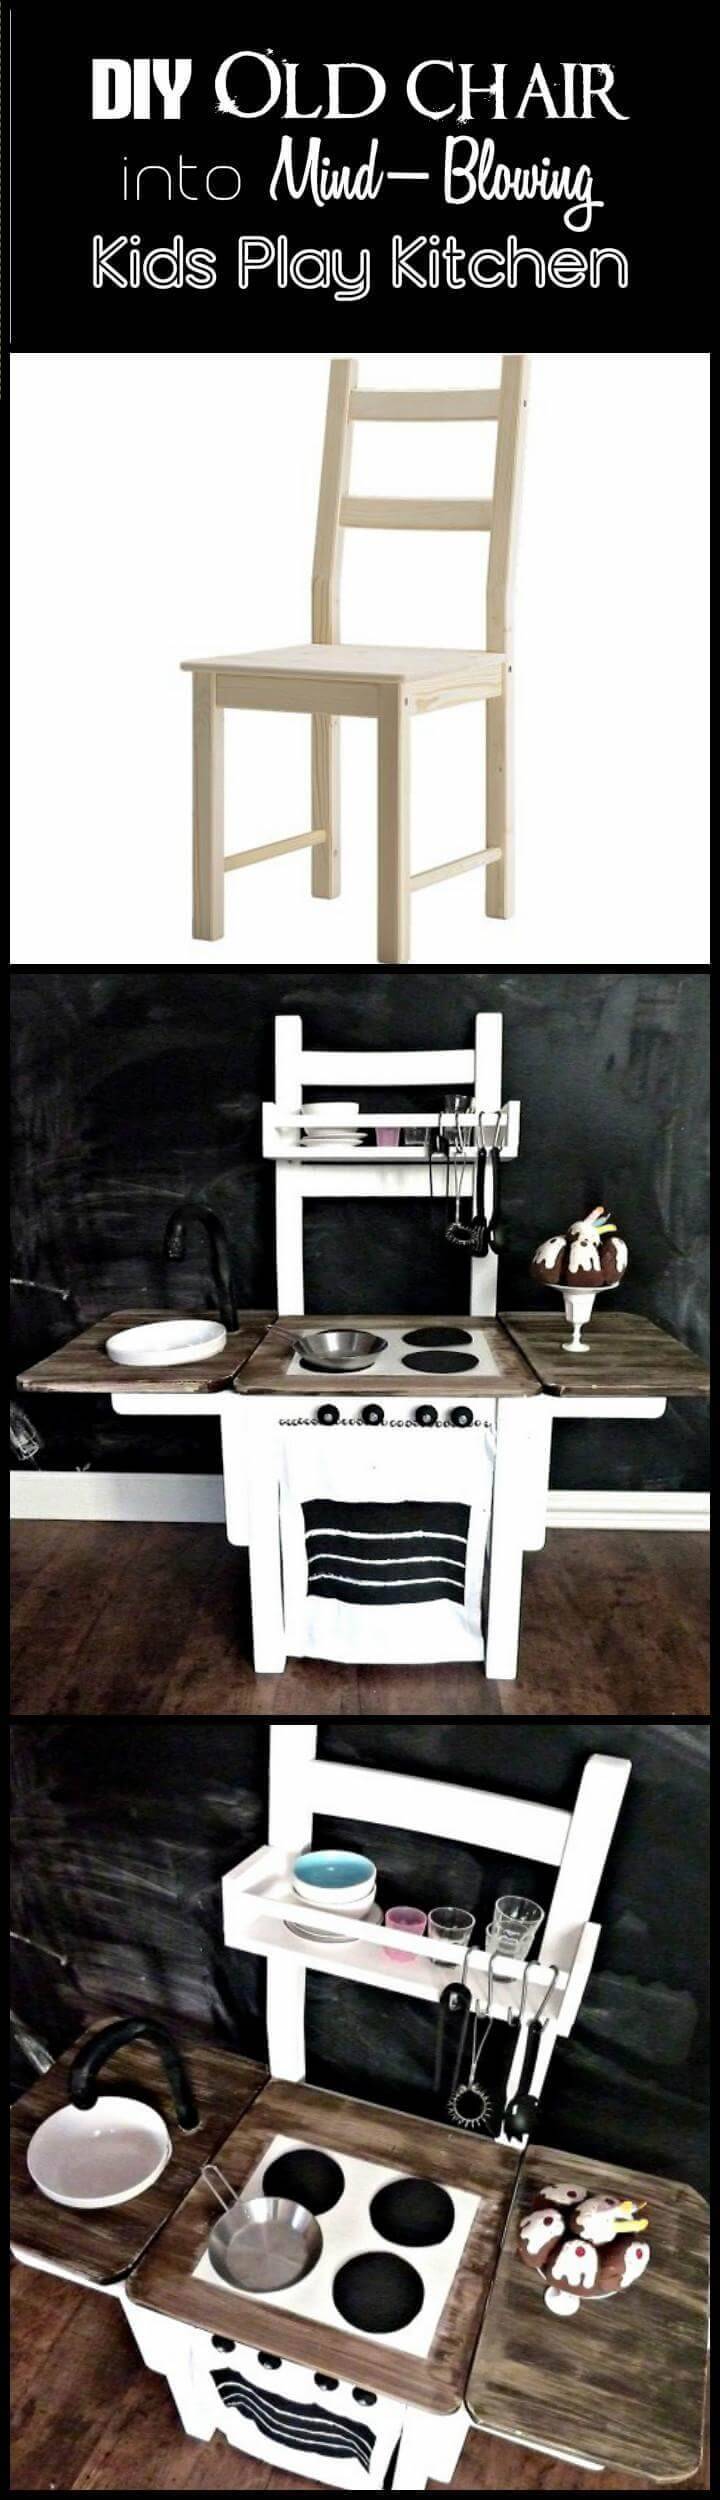 repurposed old chair into mind-blowing kids play kitchen